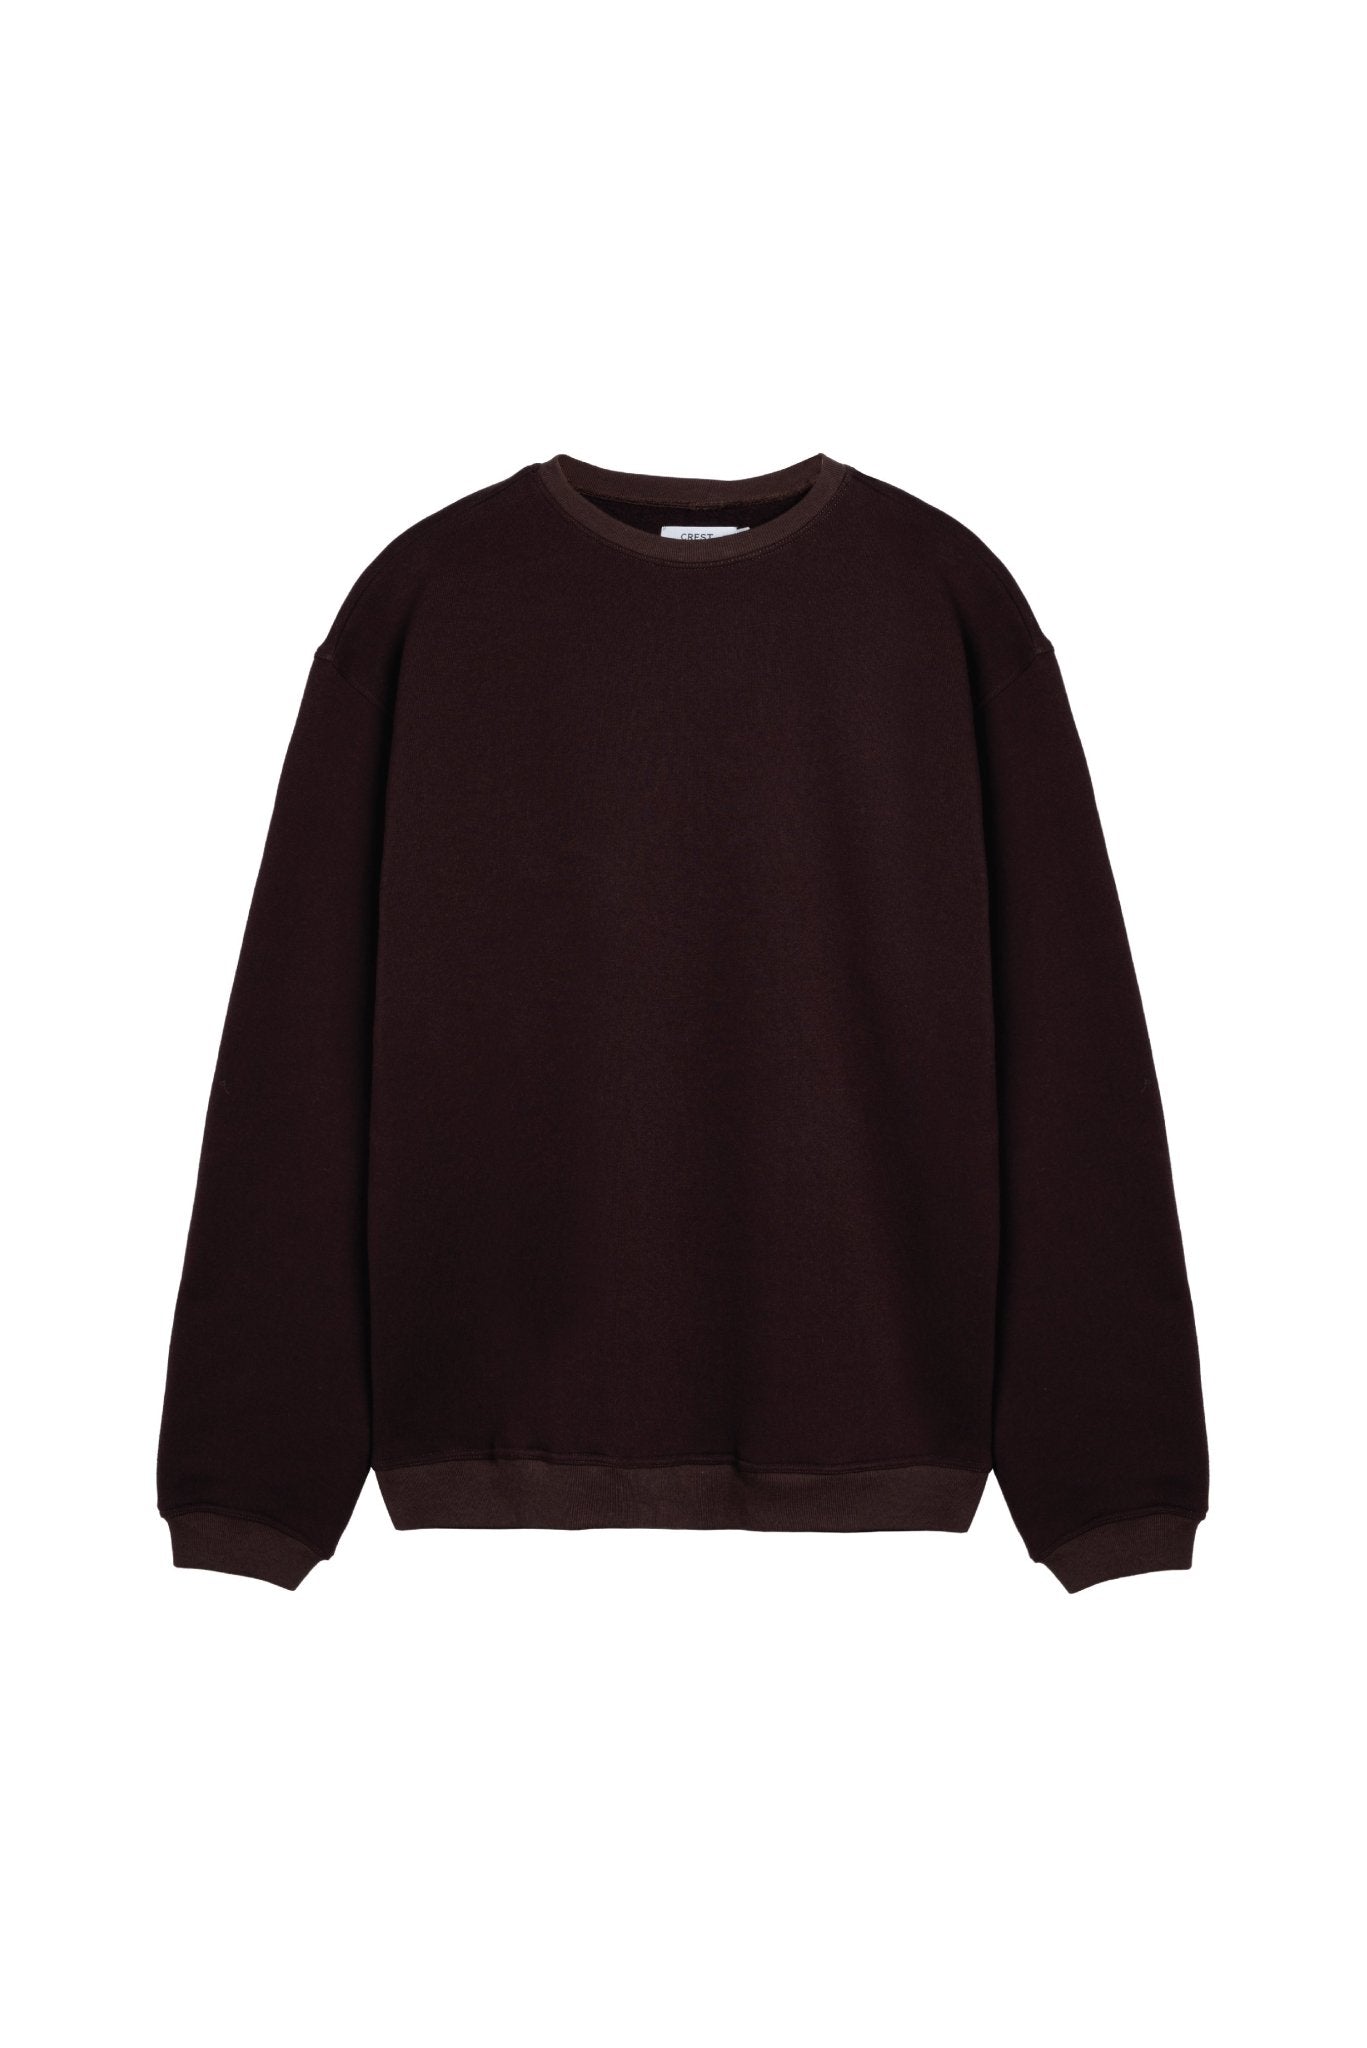 Relaxed-fit sweatshirt in solid chocolate brown by Crest, featuring raglan sleeves and a CRST label on the side.